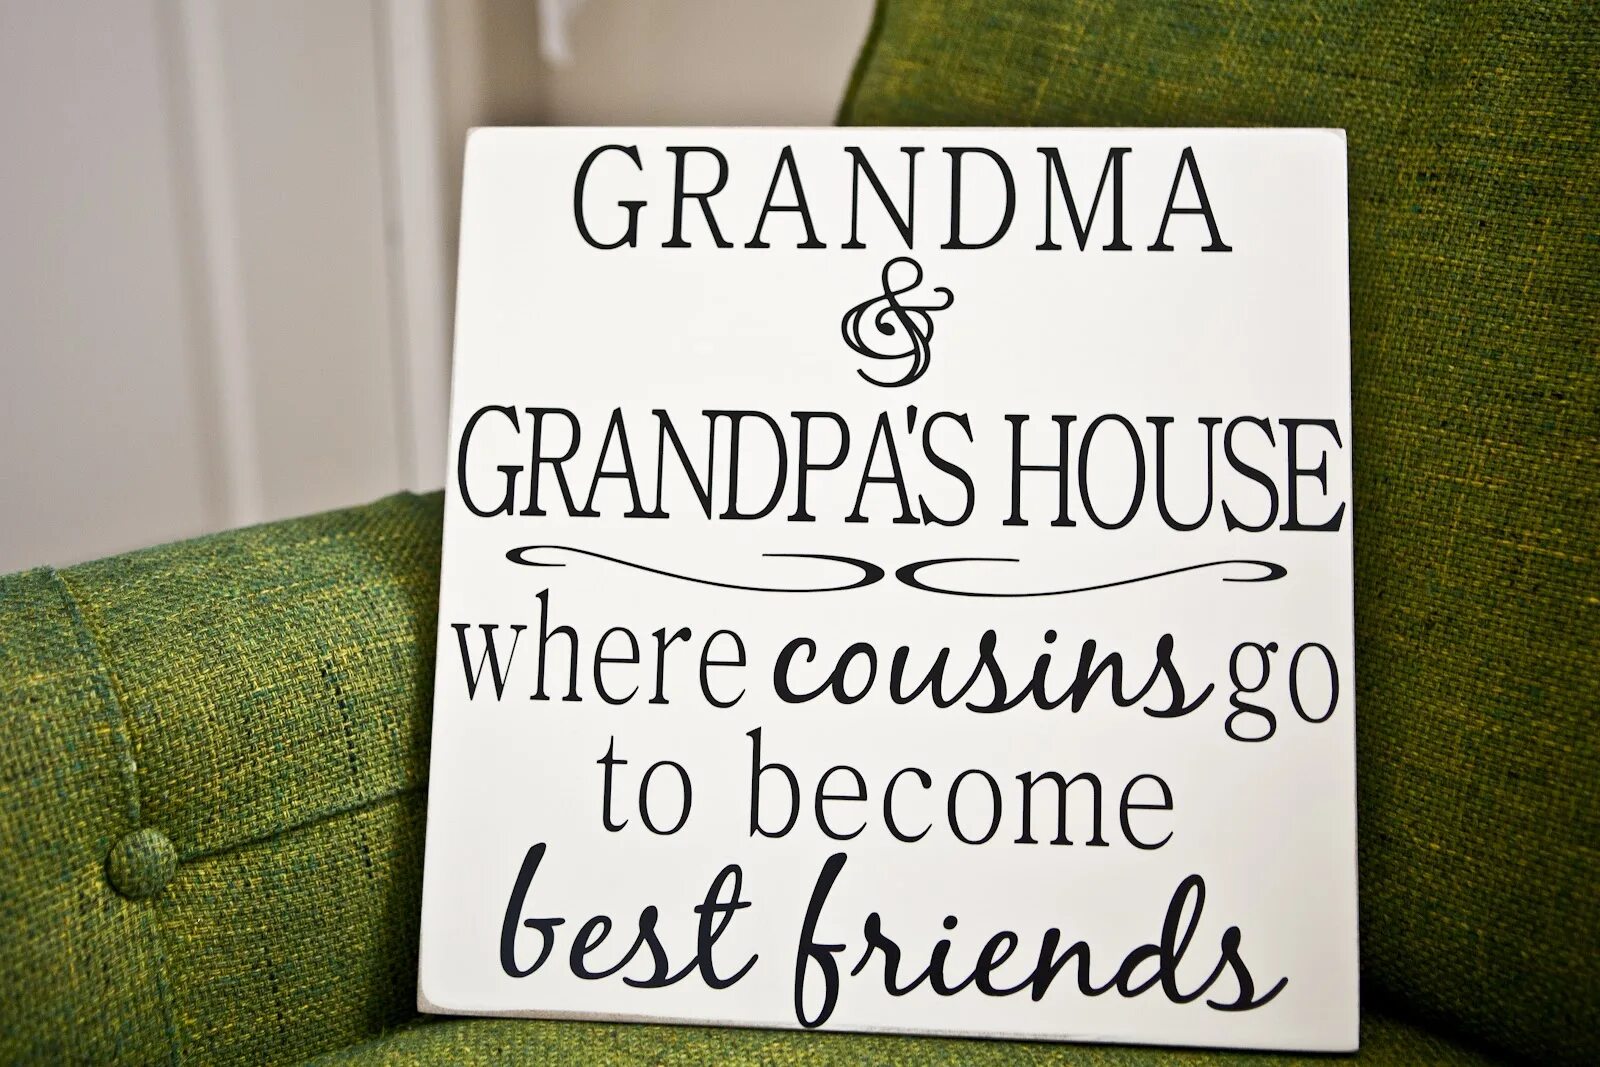 Quotes about grandma. Grandparents House. Grandparents quotes. Grandparent House quotes. My grandparents house